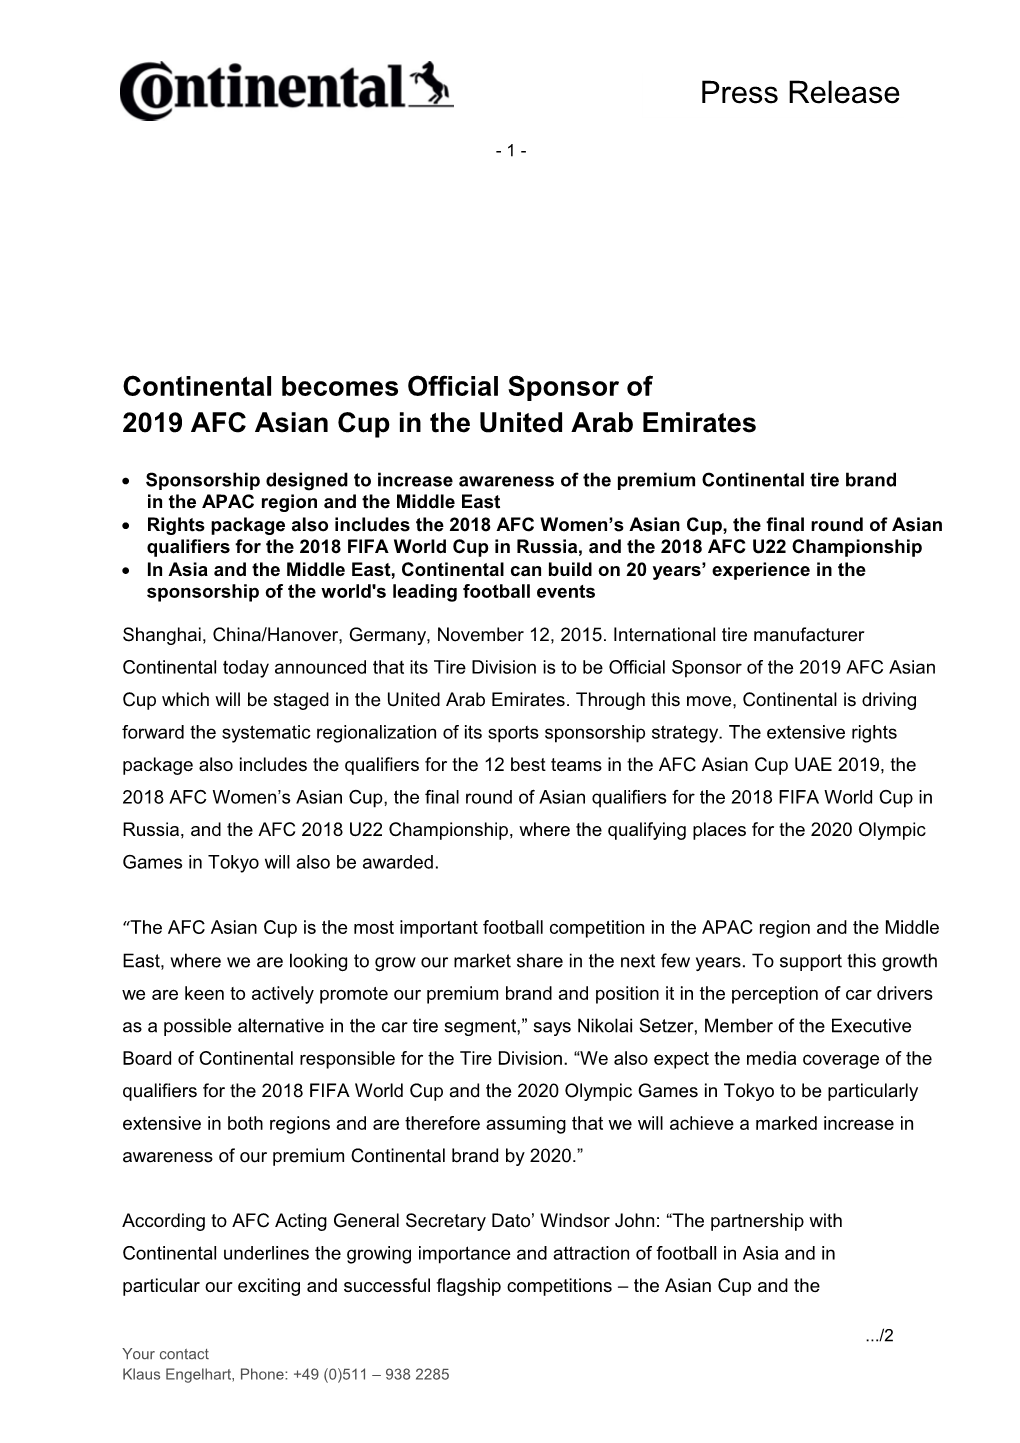 Continental Becomes Official Sponsor of 2019 AFC Asian Cup in the United Arab Emirates